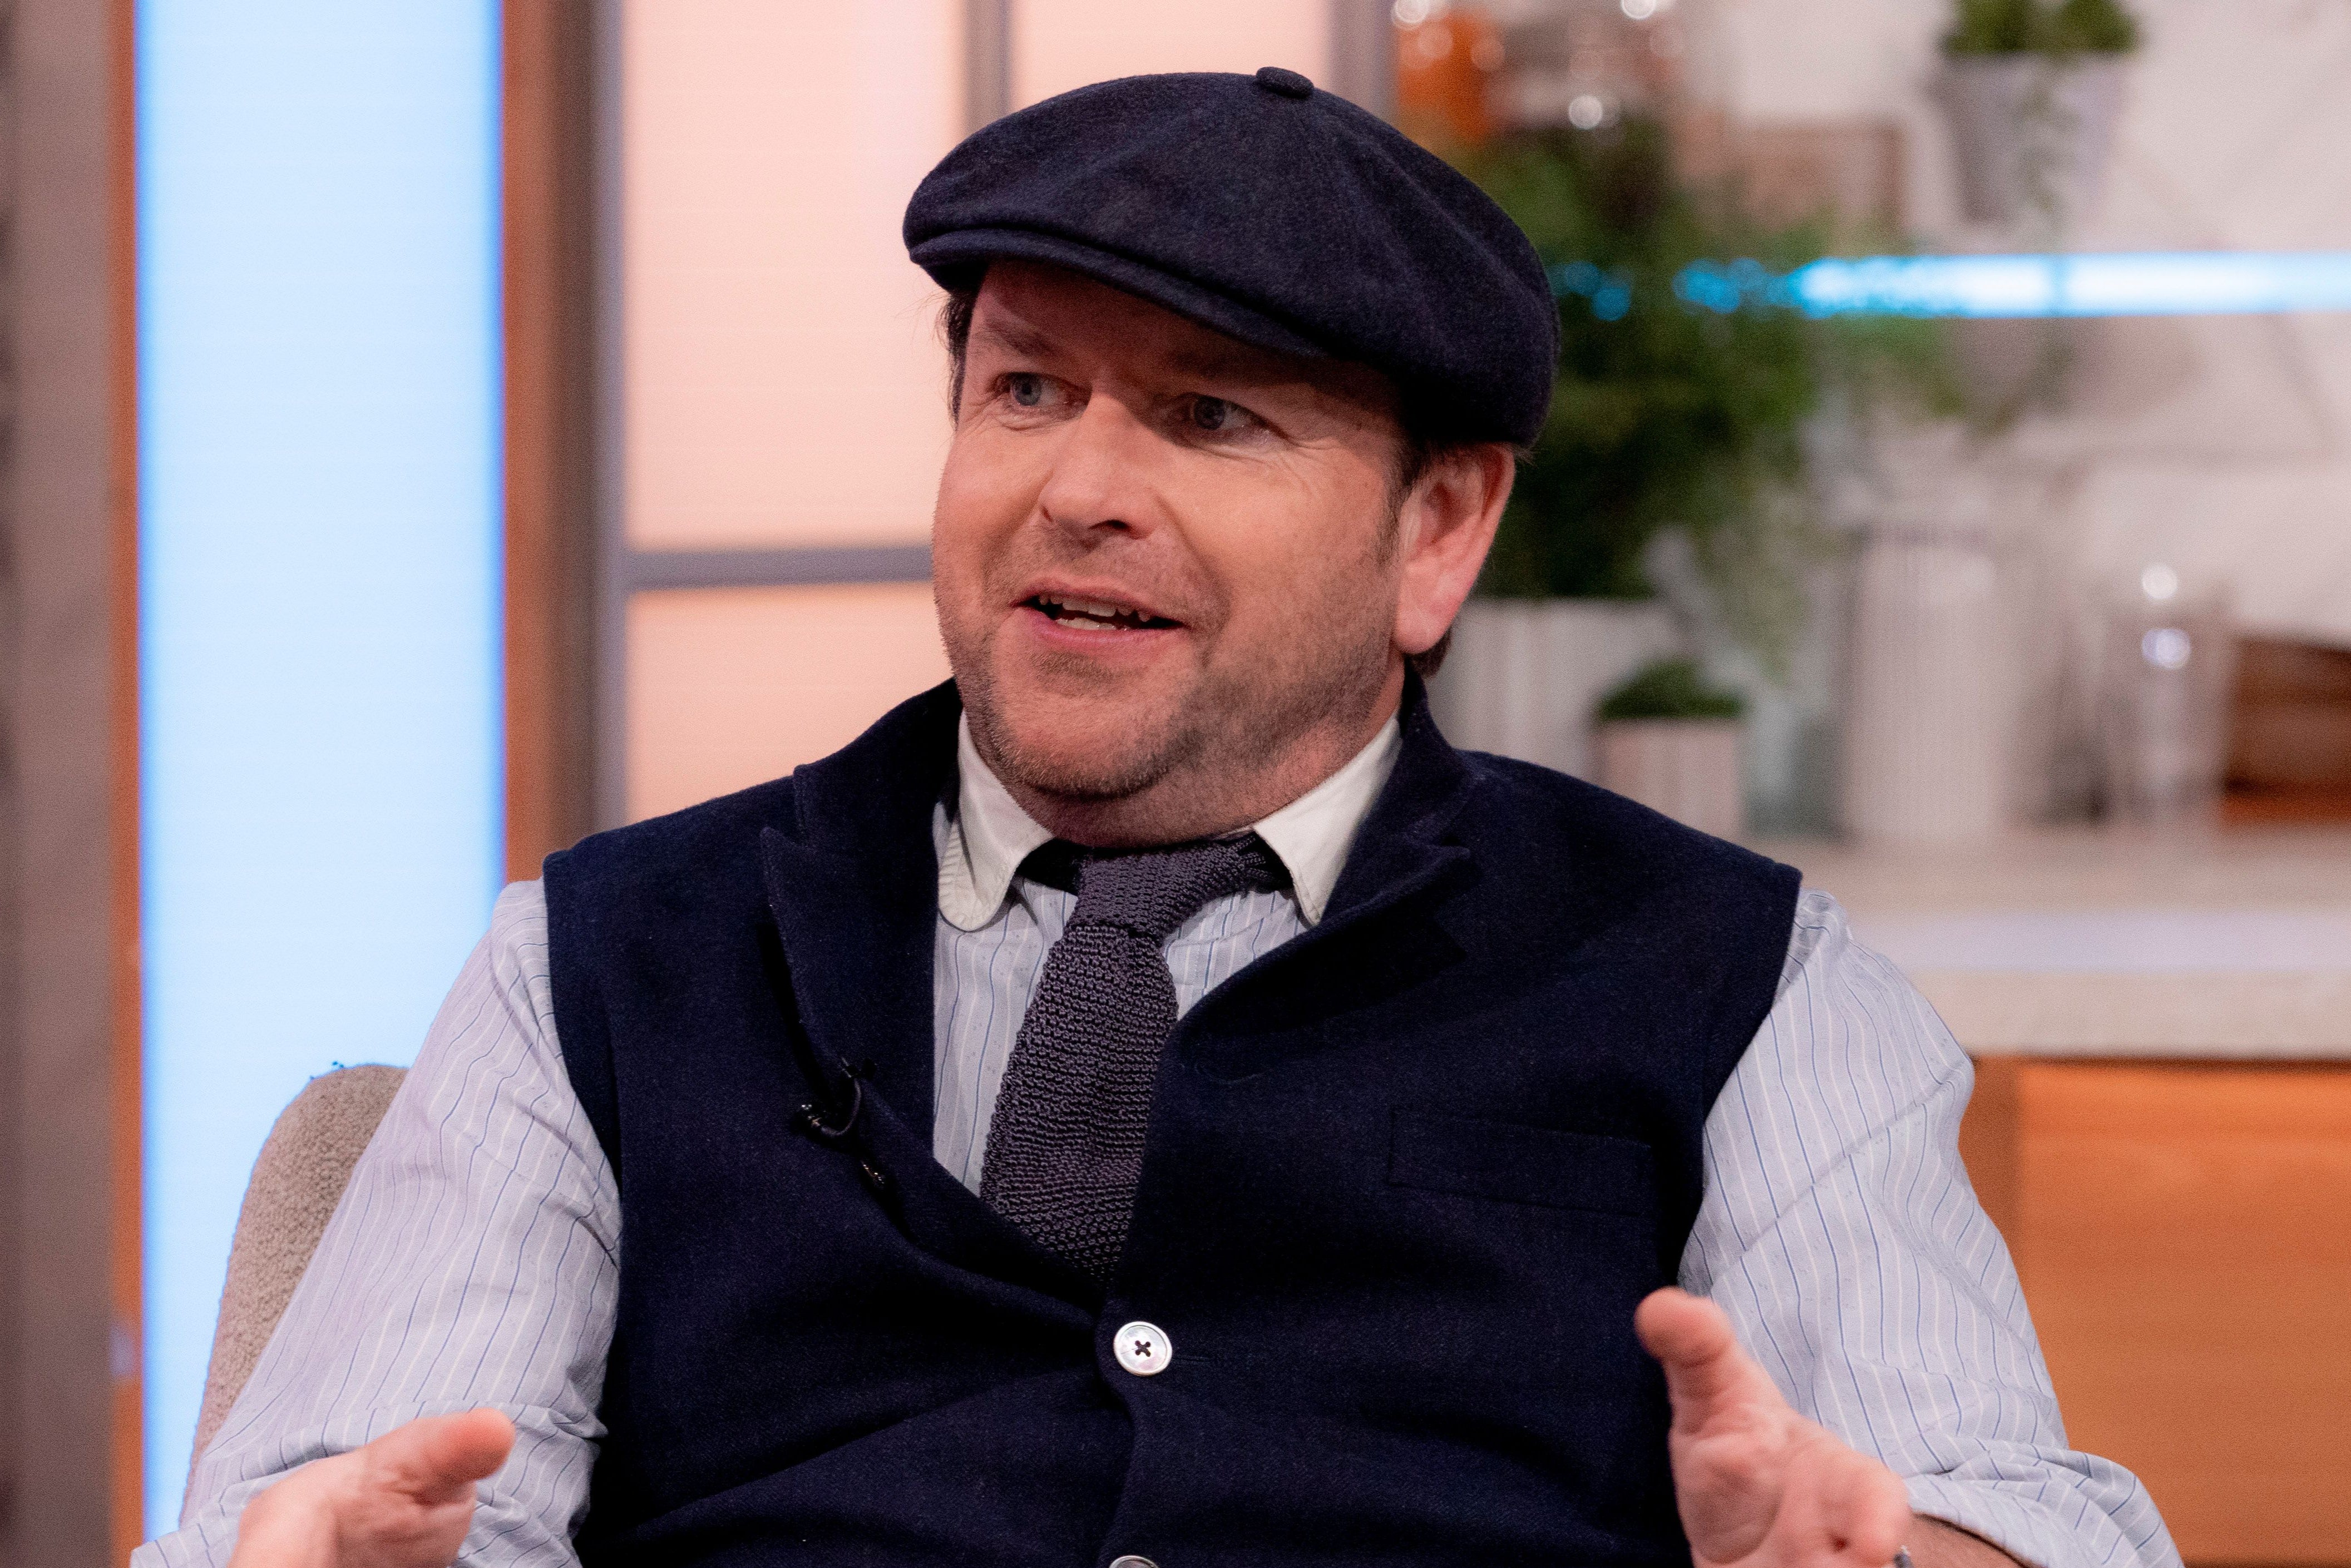 Celebrity chef James Martin ended his relationship with Broccoli in 2008